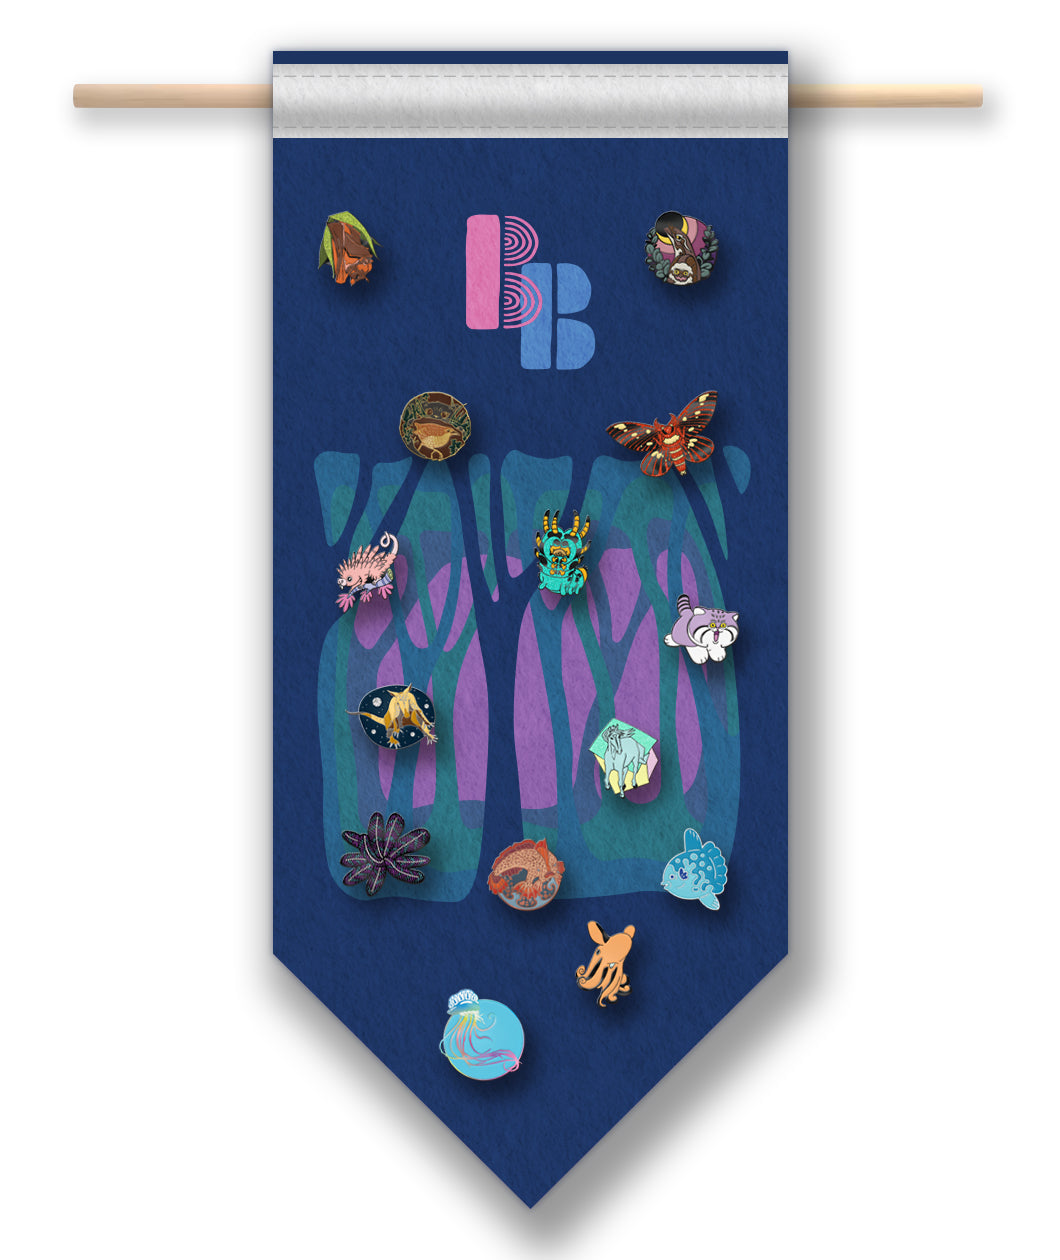 A grid of pins on the Bizarre Beasts pin banner that are each different animals from past Bizarre Beasts designs. They are all part of the Season Zero Pin Set.